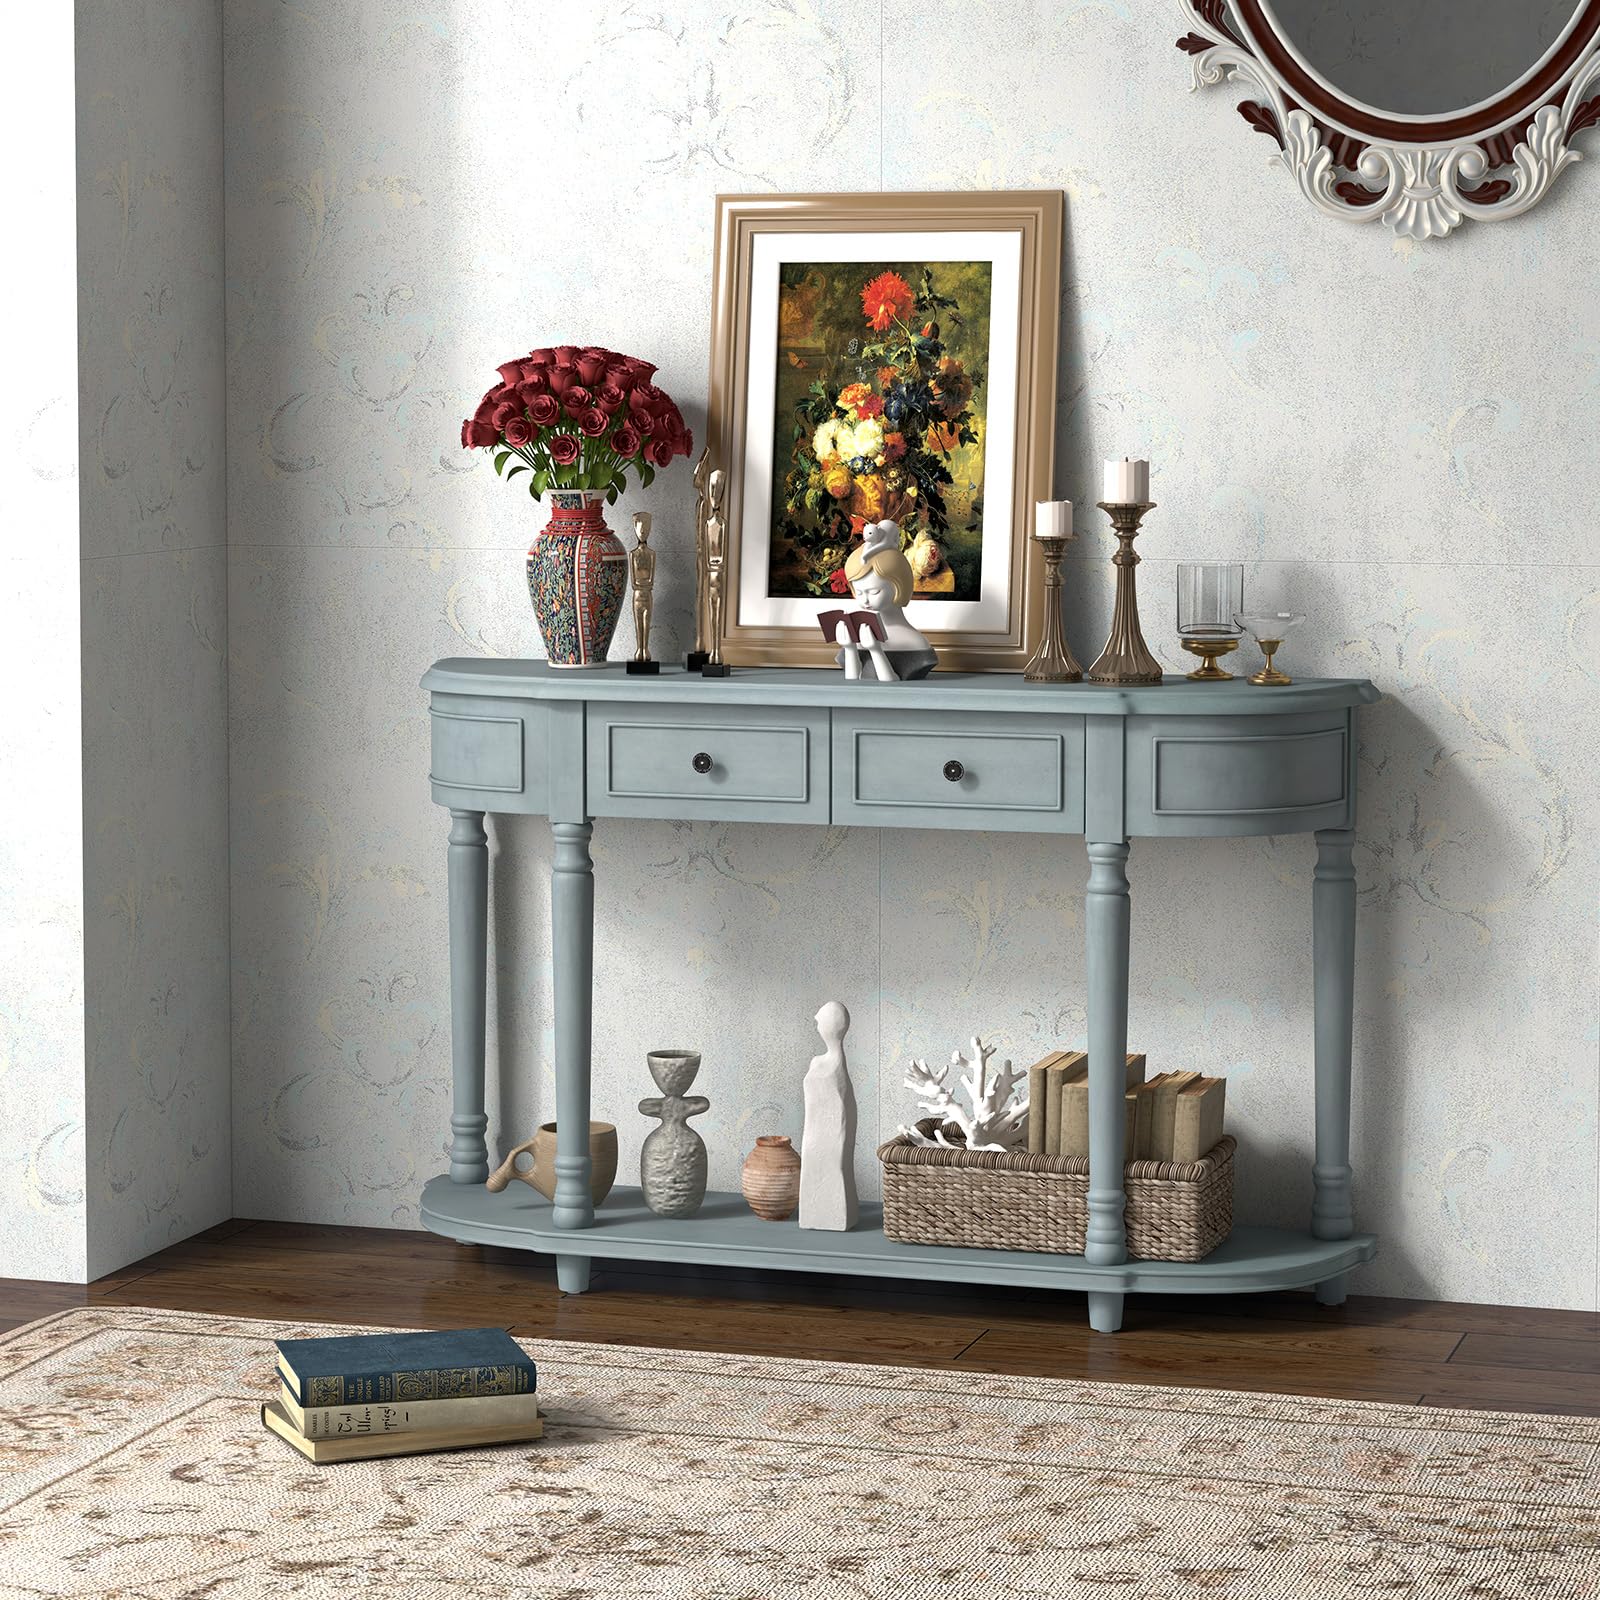 Giantex Console Table with Storage, 52” Long Sofa Table with 2 Drawers, Open Shelf, Solid Wood Legs